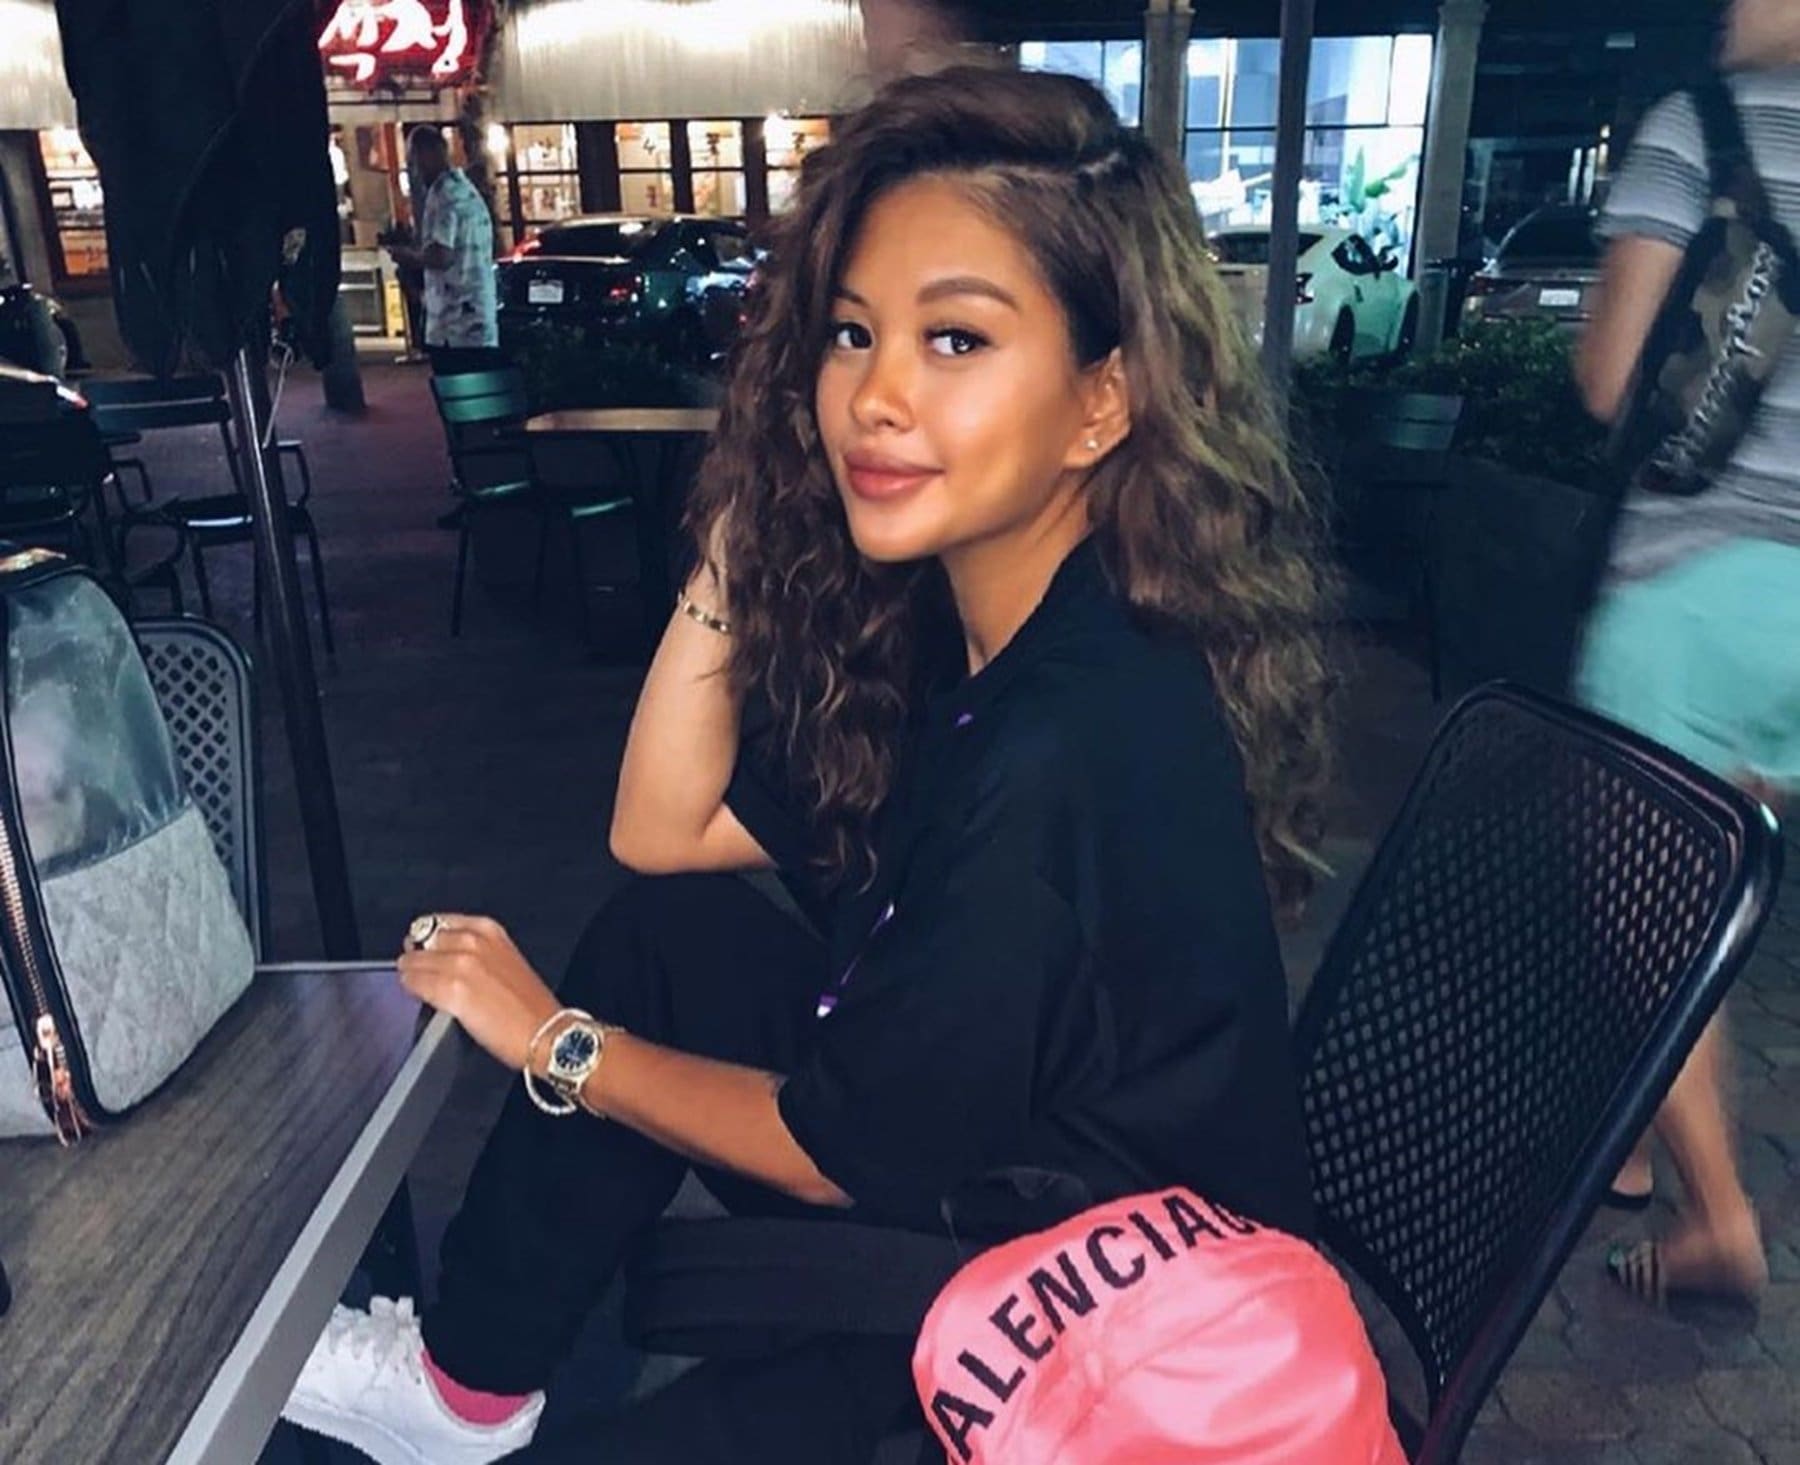 Chris Brown's Baby Mama, Ammika Harris, Poses In A See-Through Black Dress And Fans Adore This Quarantine Fashion Moment